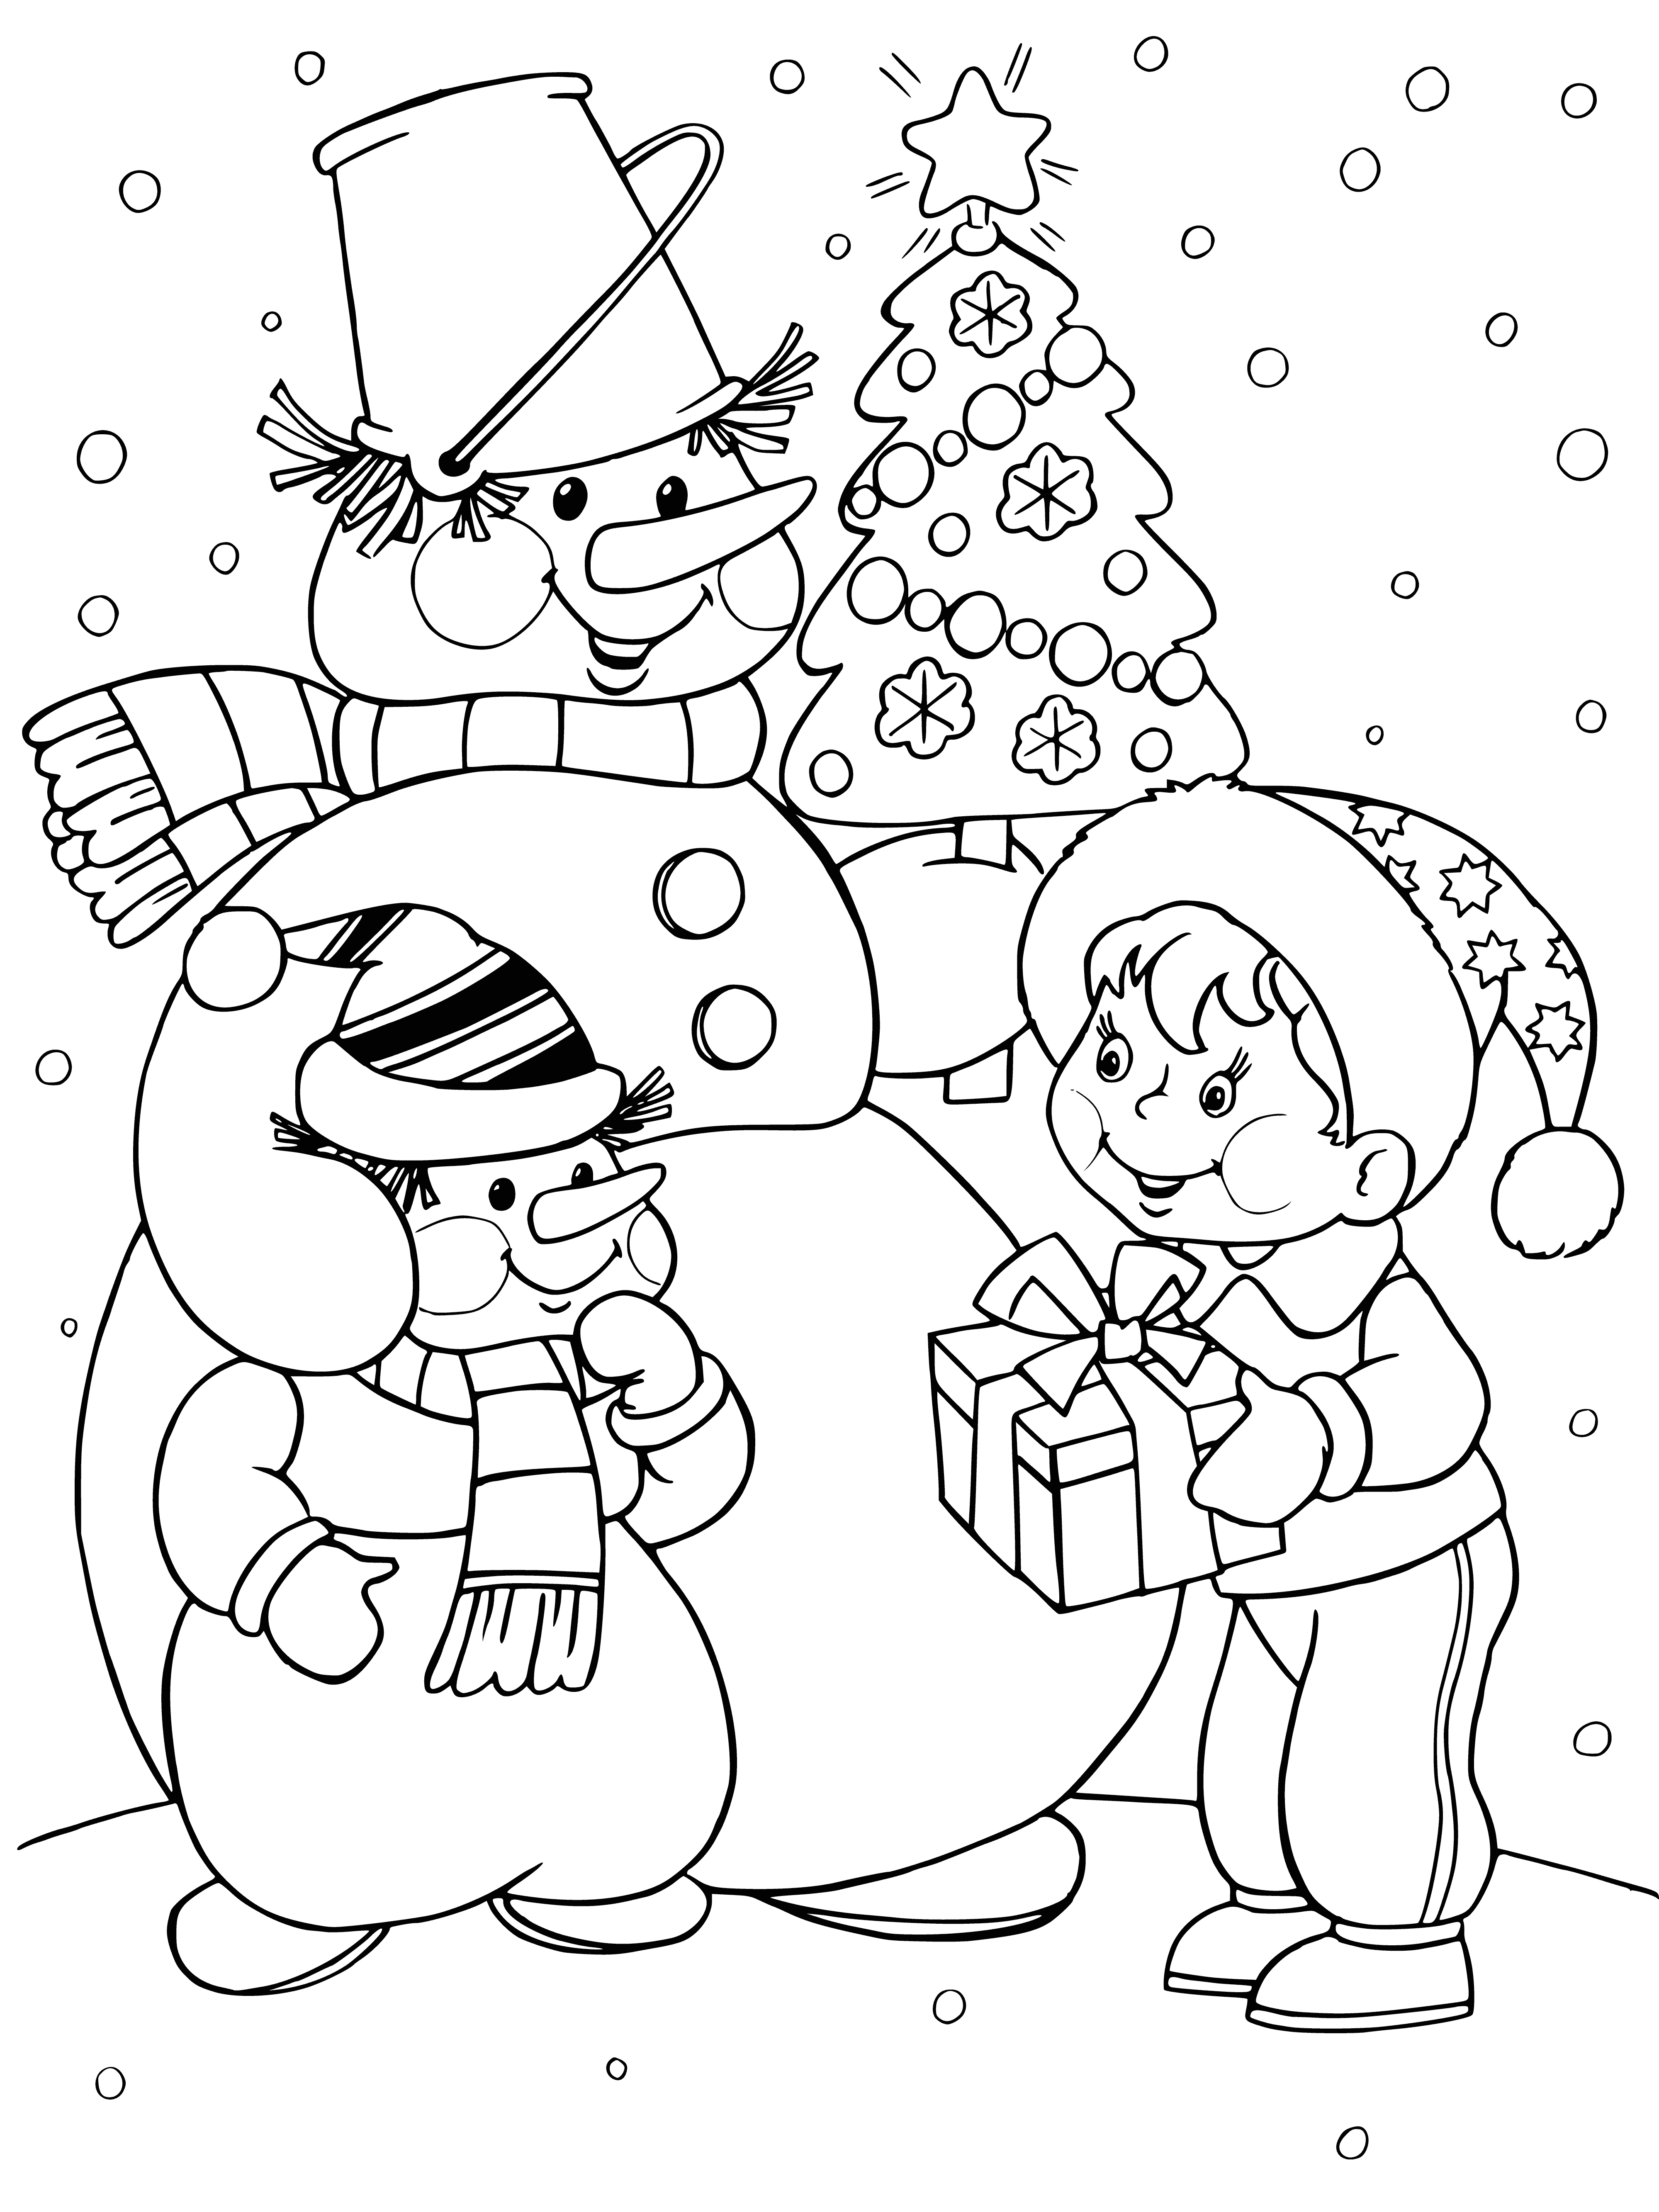 coloring page: Snowman holds present, adorned w/carrot nose, coal eyes, branch mouth, & red hat w/white pom-pom.